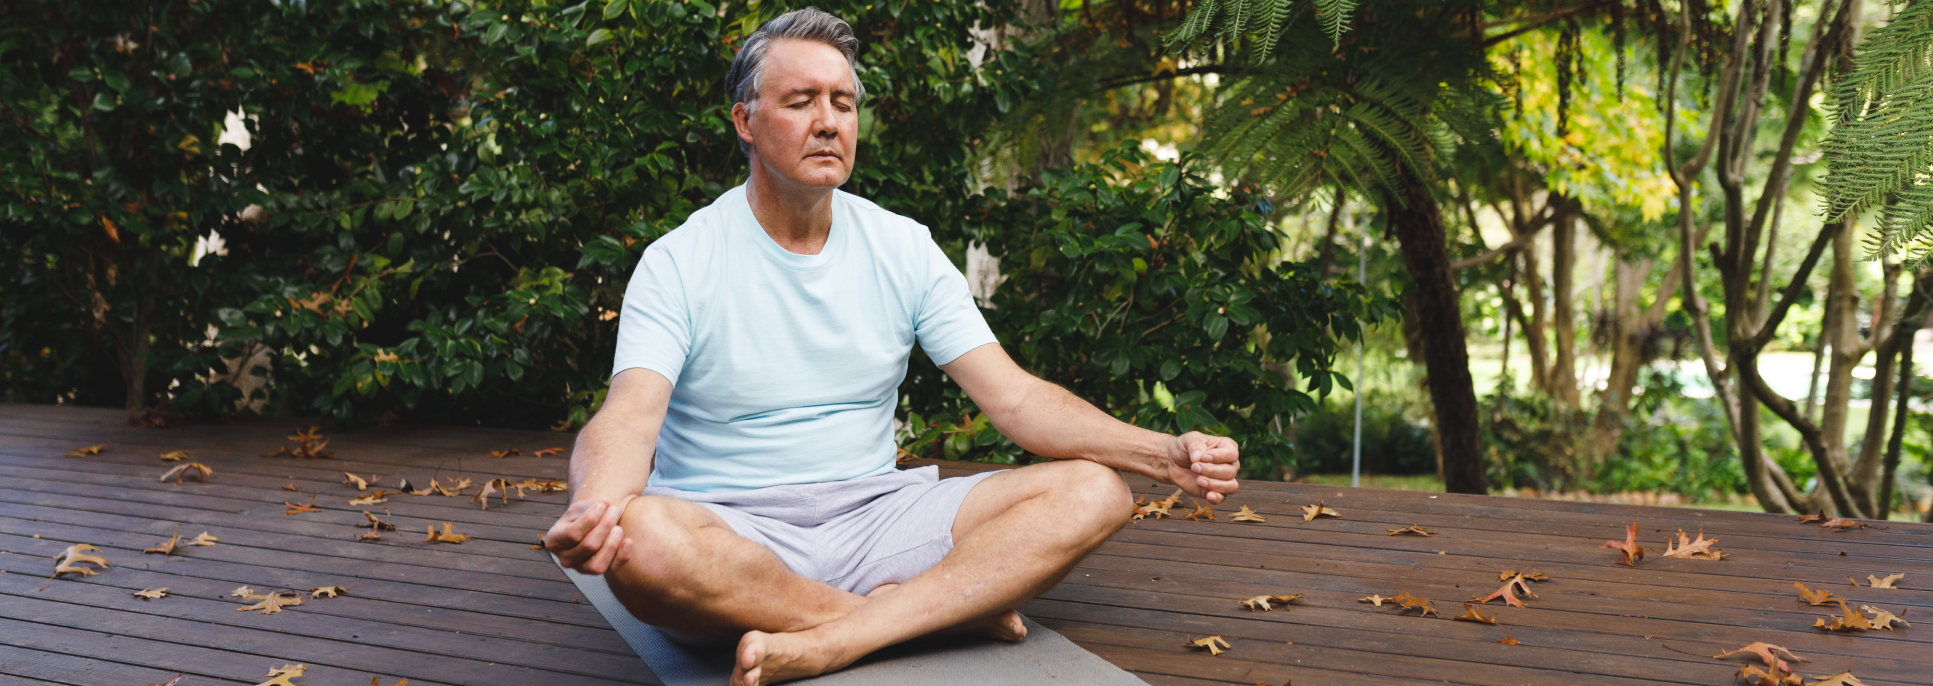 Man relaxing in a luxurious setting as he tries to comprehend and enhance his mind-body connection